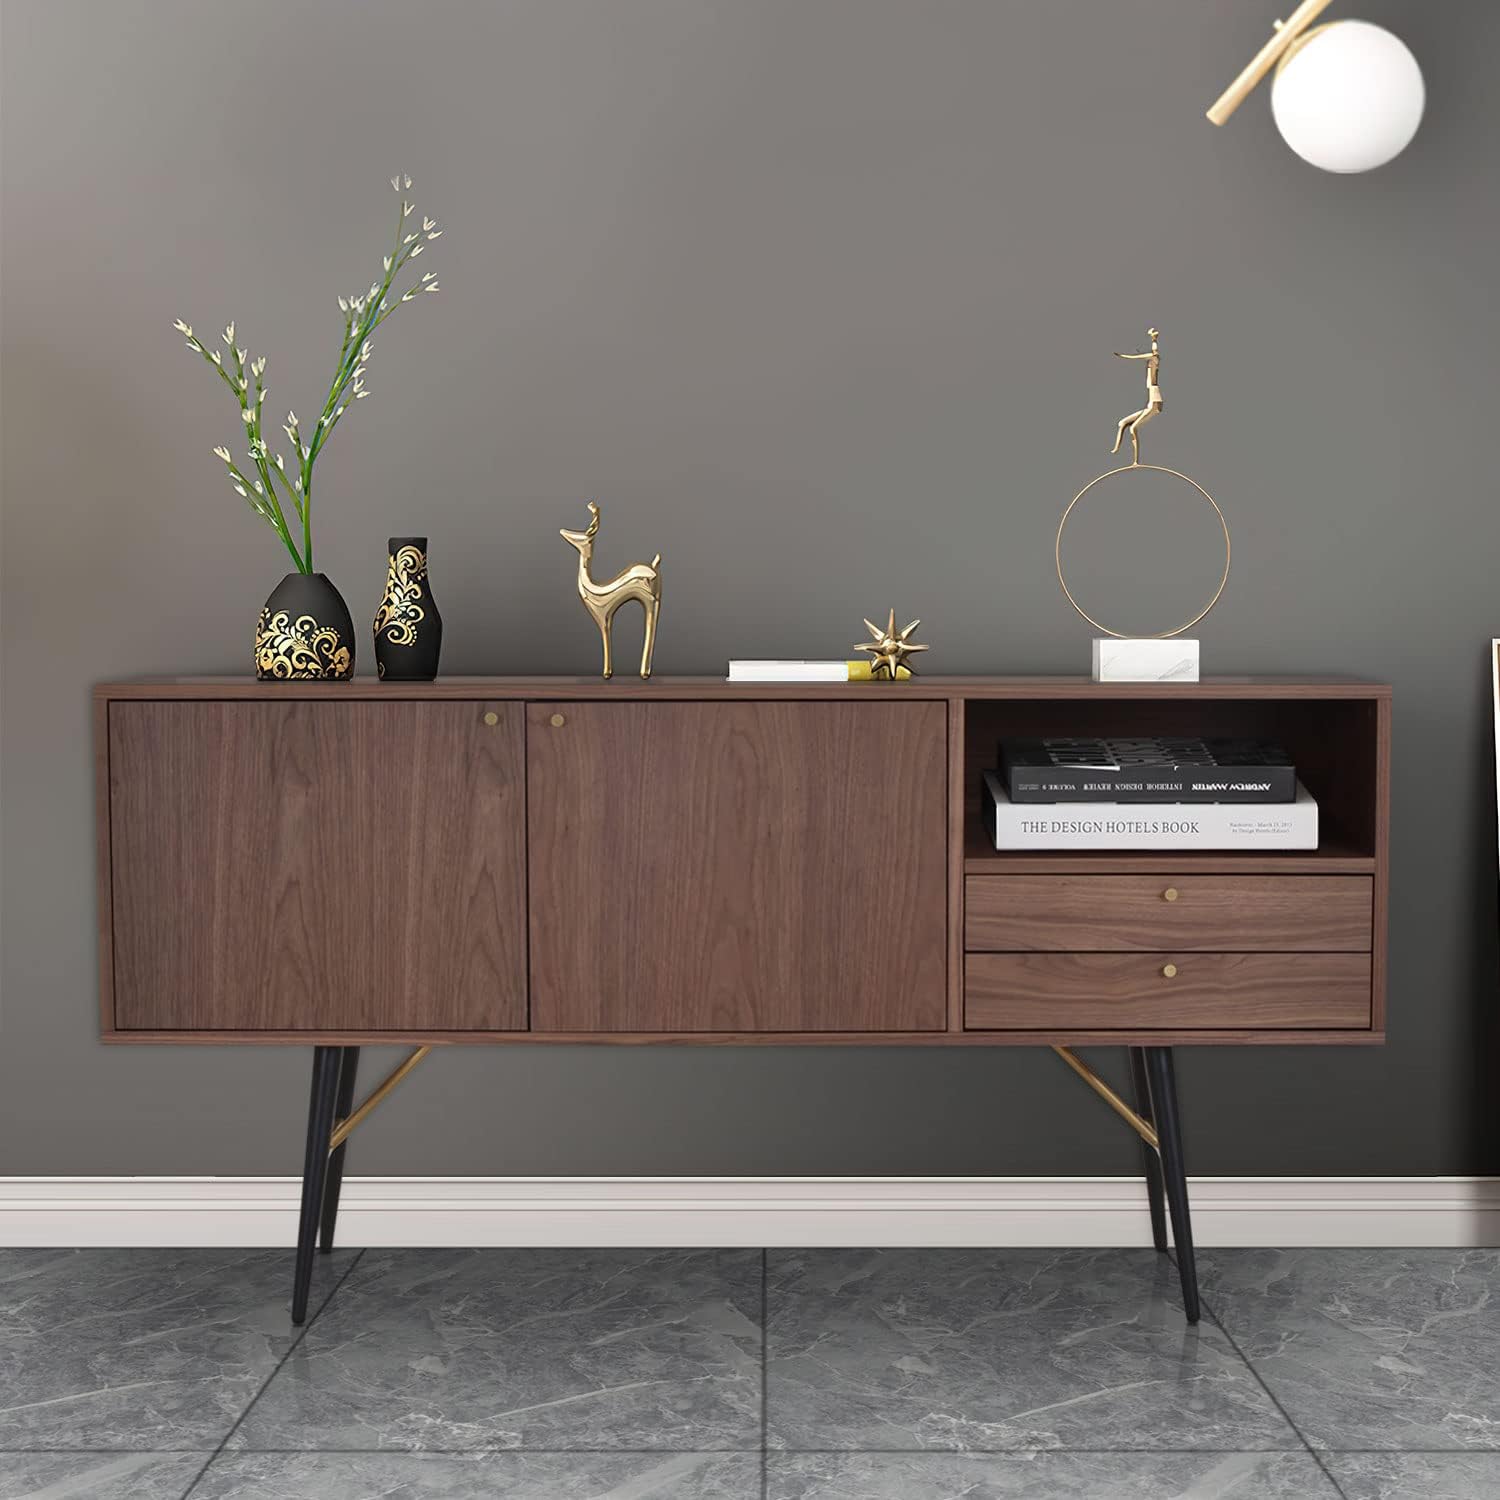 WILLIAMSPACE 62.4 Mid-Century Buffet Sideboard, Modern Walnut Wood Cabinet with 2 Drawers and 2 Doors Storage, Entryway Serving Storage Cabinet with Metal Legs